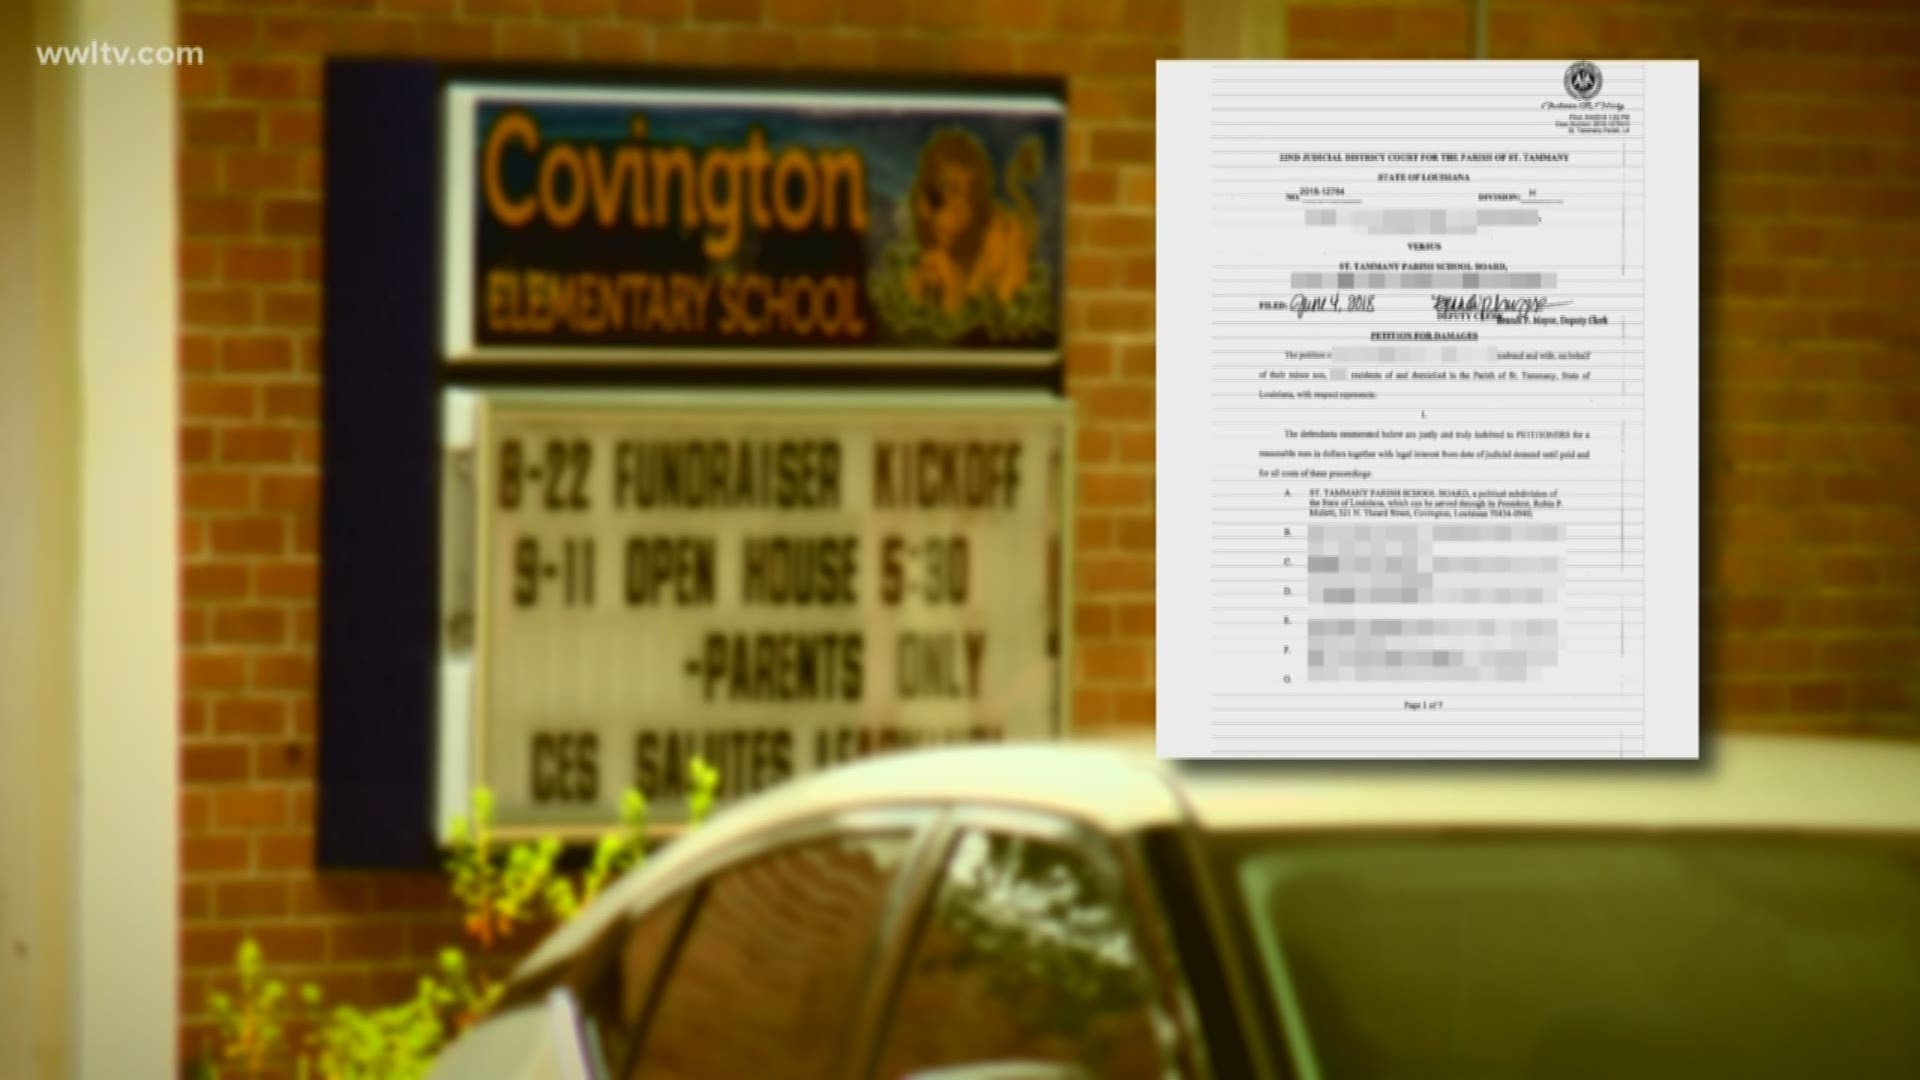 Three additional families have filed lawsuits against Covington Elementary School and the St Tammany Parish School District alleging their developmentally disabled children were neglected and abused in a special education classroom during the 2017-2018 sc